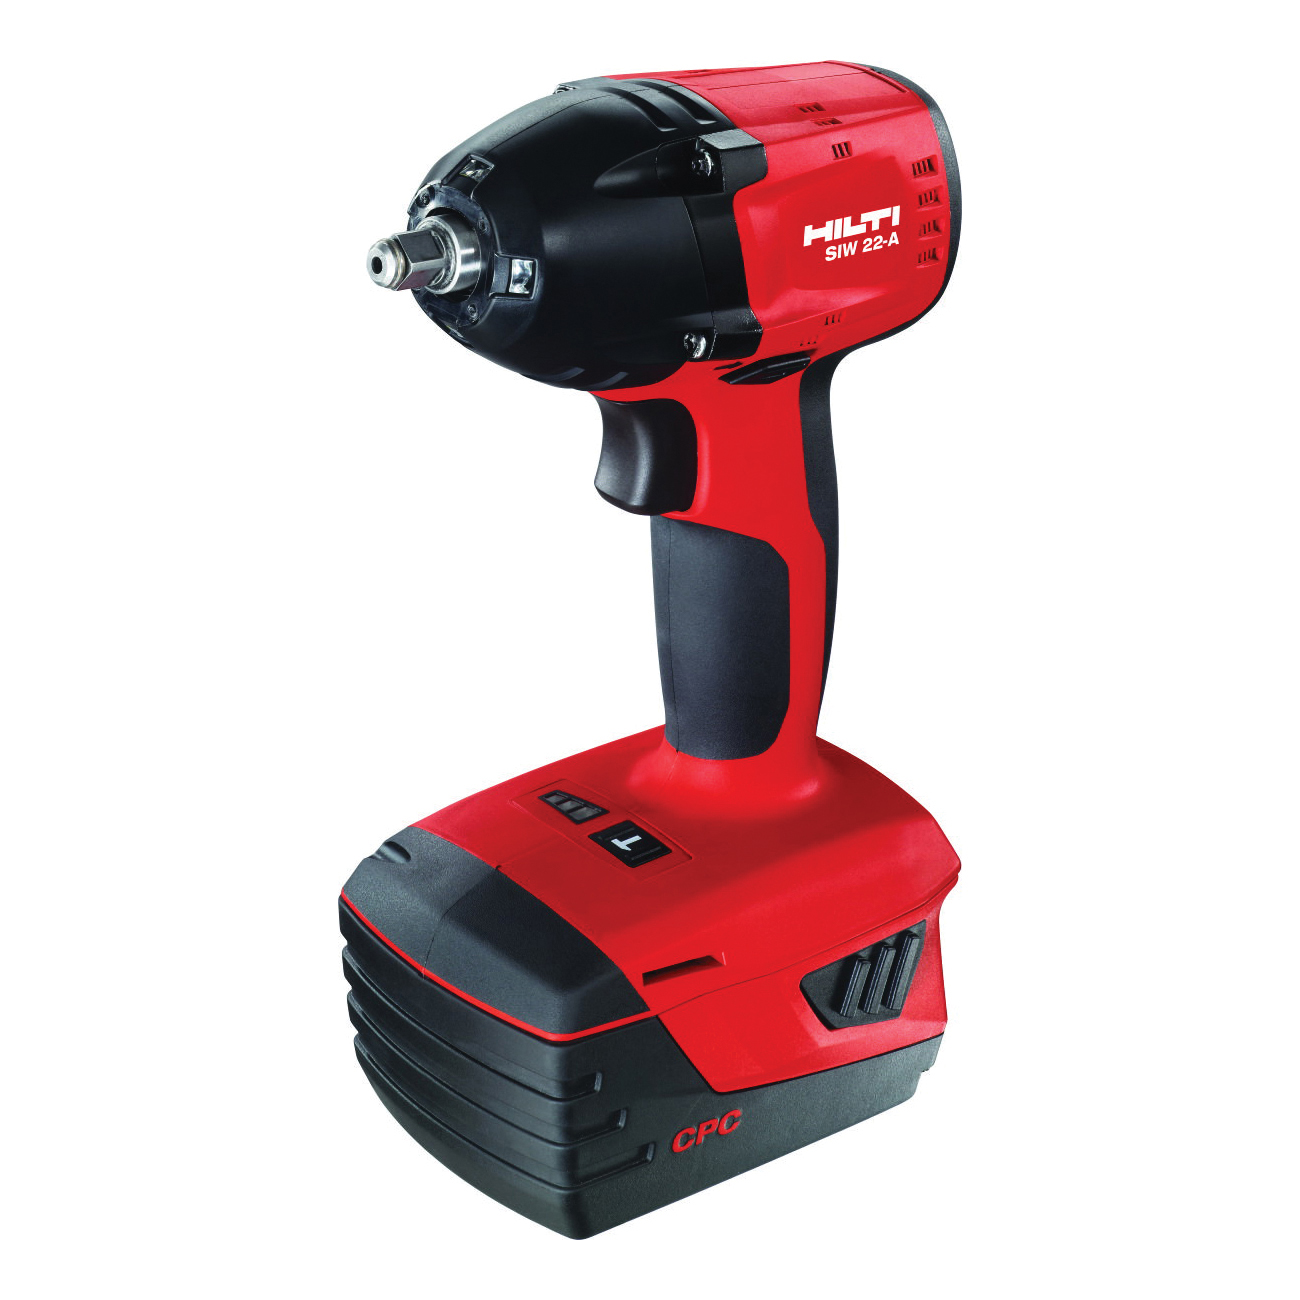 Ingersoll-Rand 2135PTIMAX Industrial Duty Standard Anvil Air Impact Wrench, 1/2 in Drive, 50 to 550 ft-lb Torque, 24 cfm Full Load/5 cfm Average Air Flow, 7-1/3 in OAL